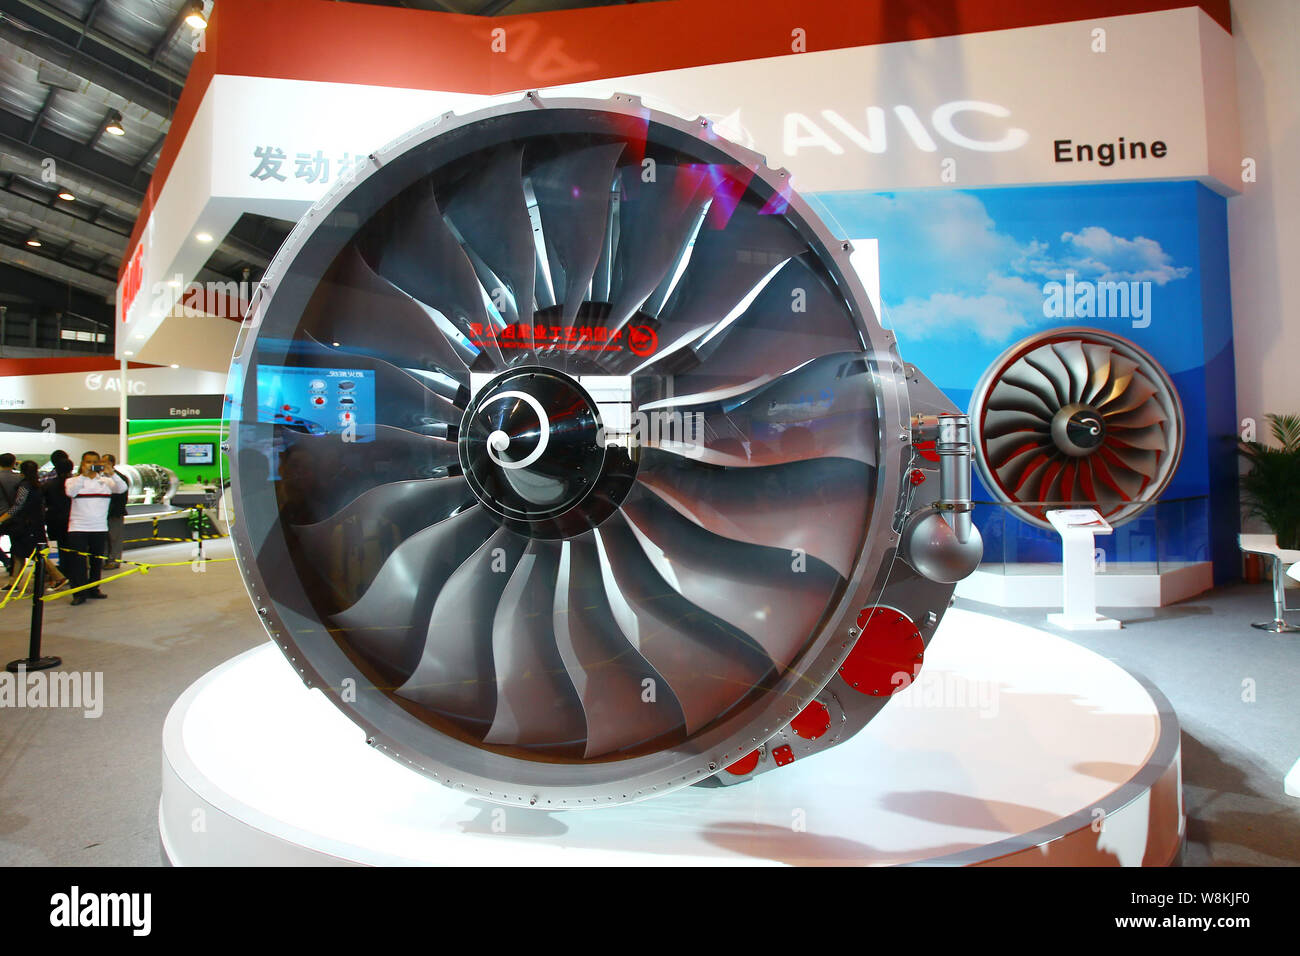 --FILE--A model of the CJ-1000A high-bypass-ratio turbofan engine is on display at the stand of AVIC (Aviation Industry Corporation of China) during t Stock Photo